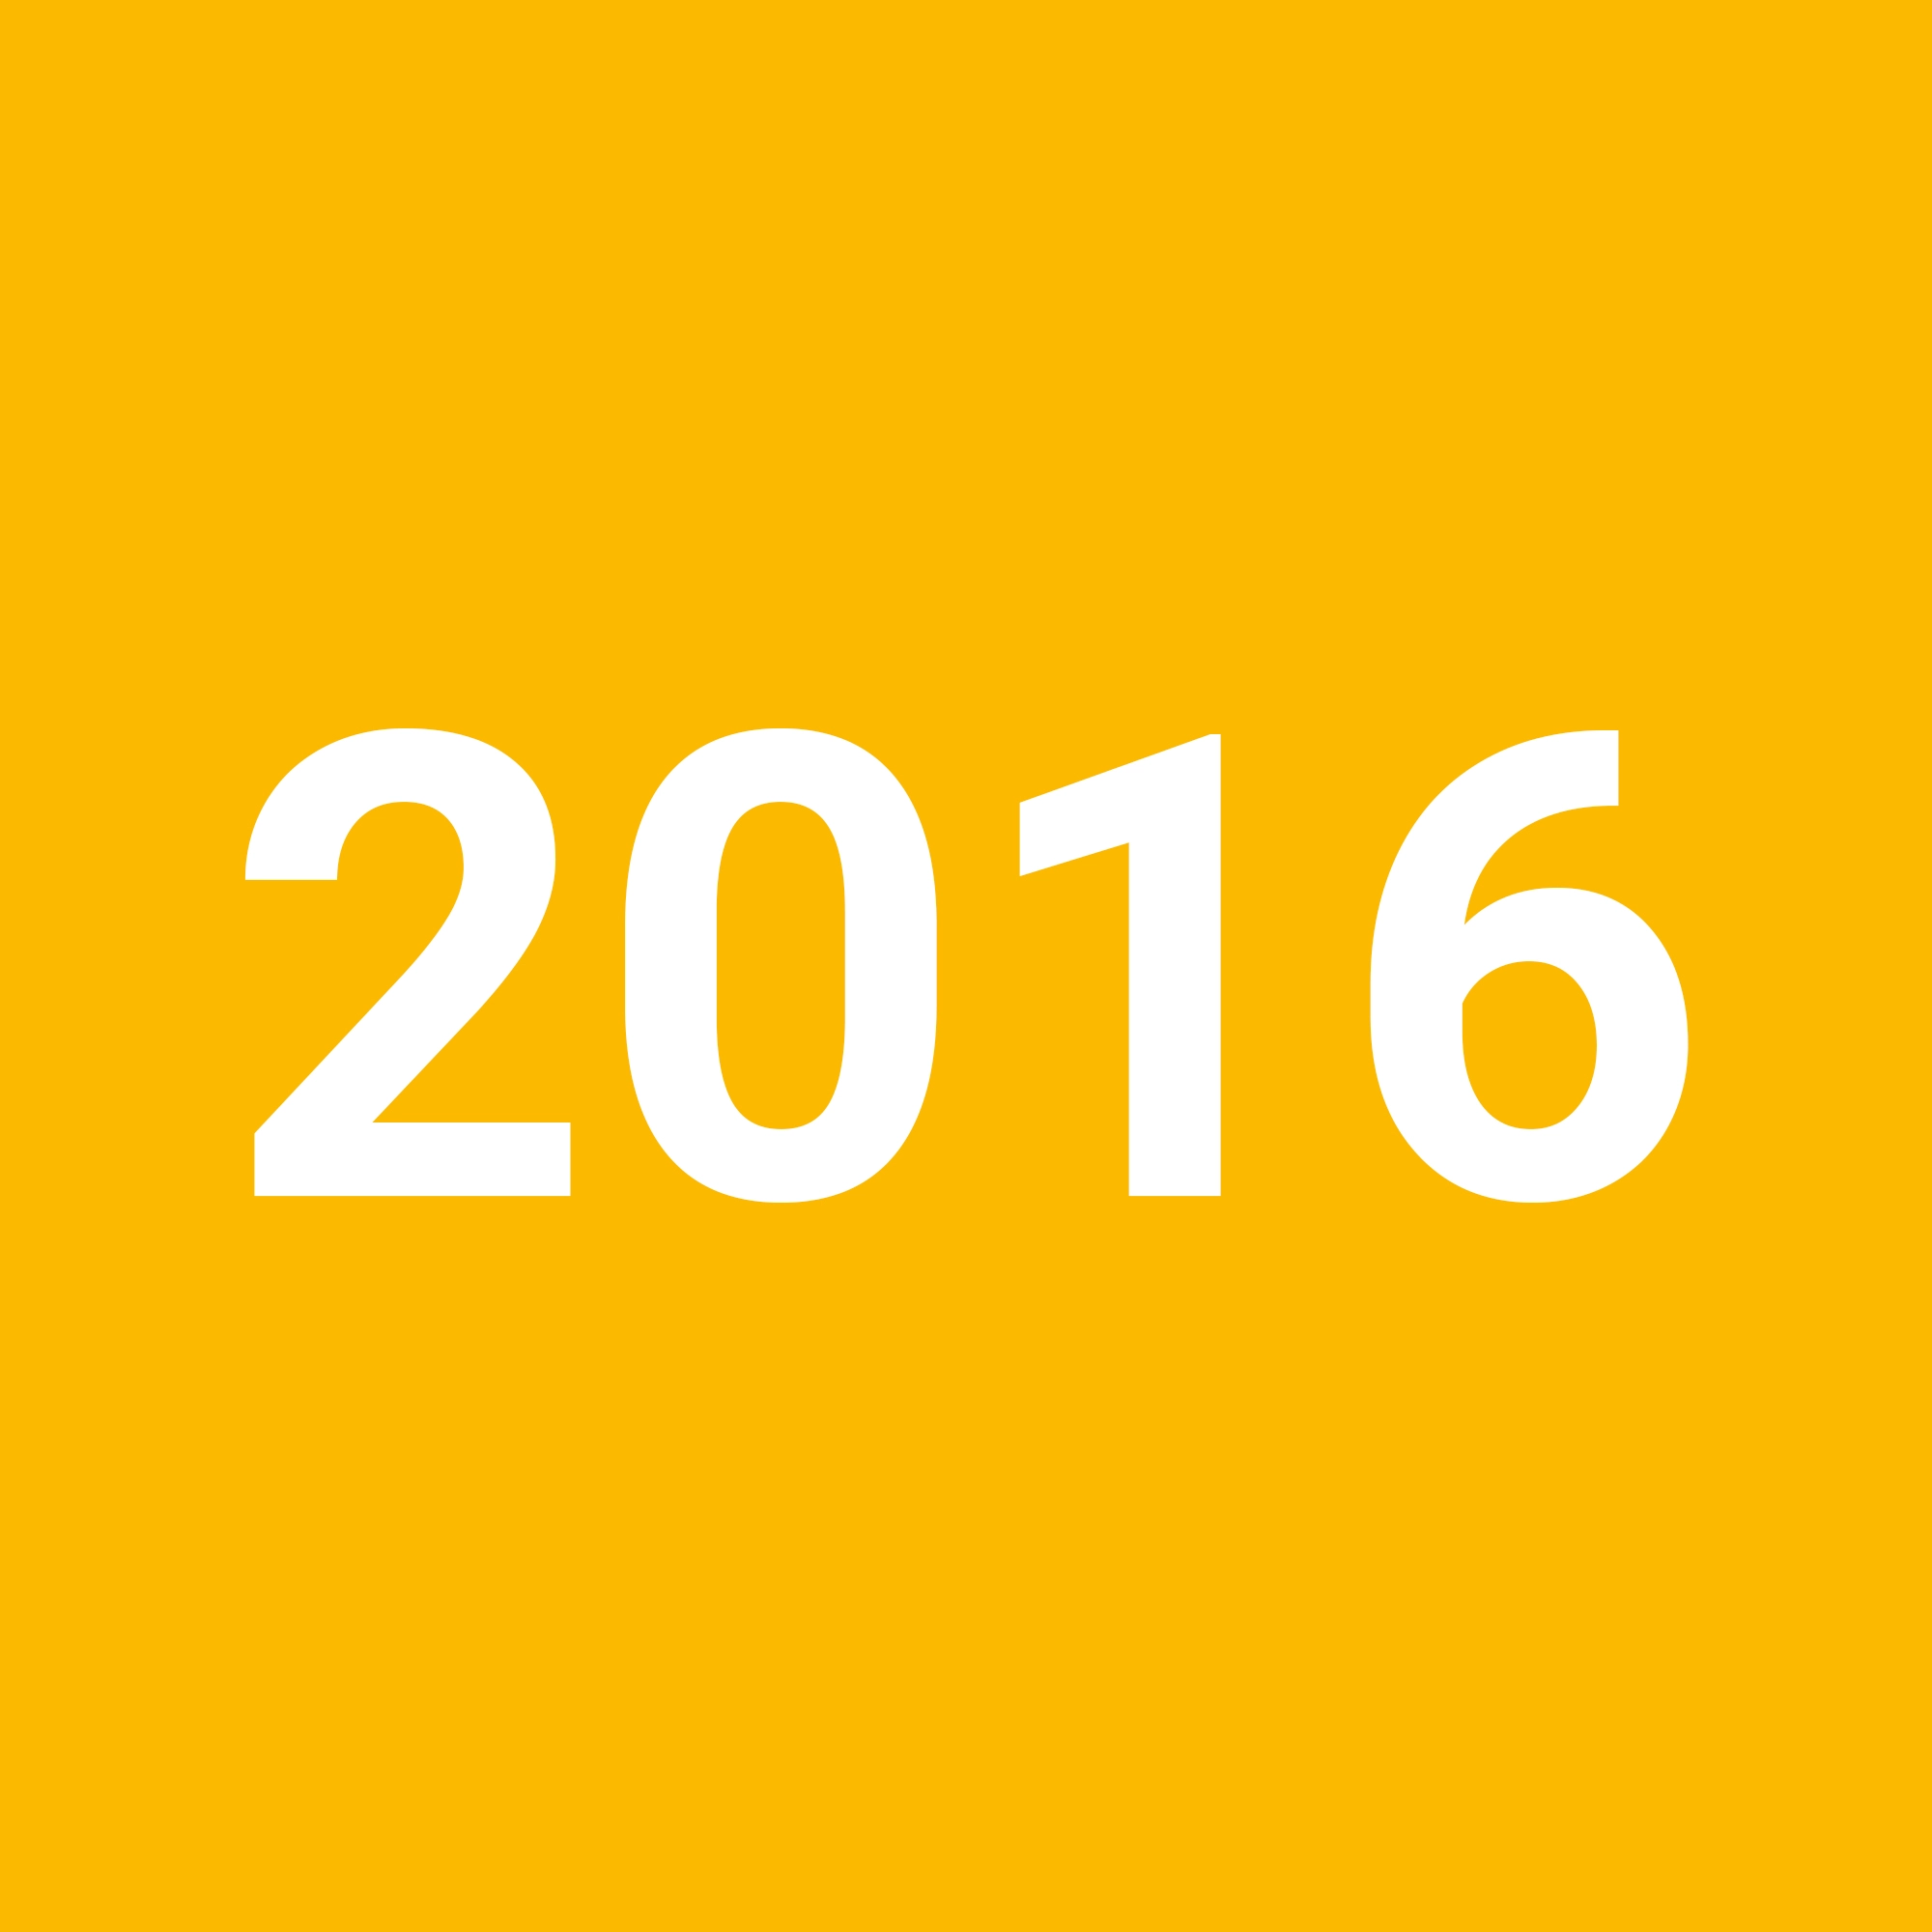 2016 on a yellow background